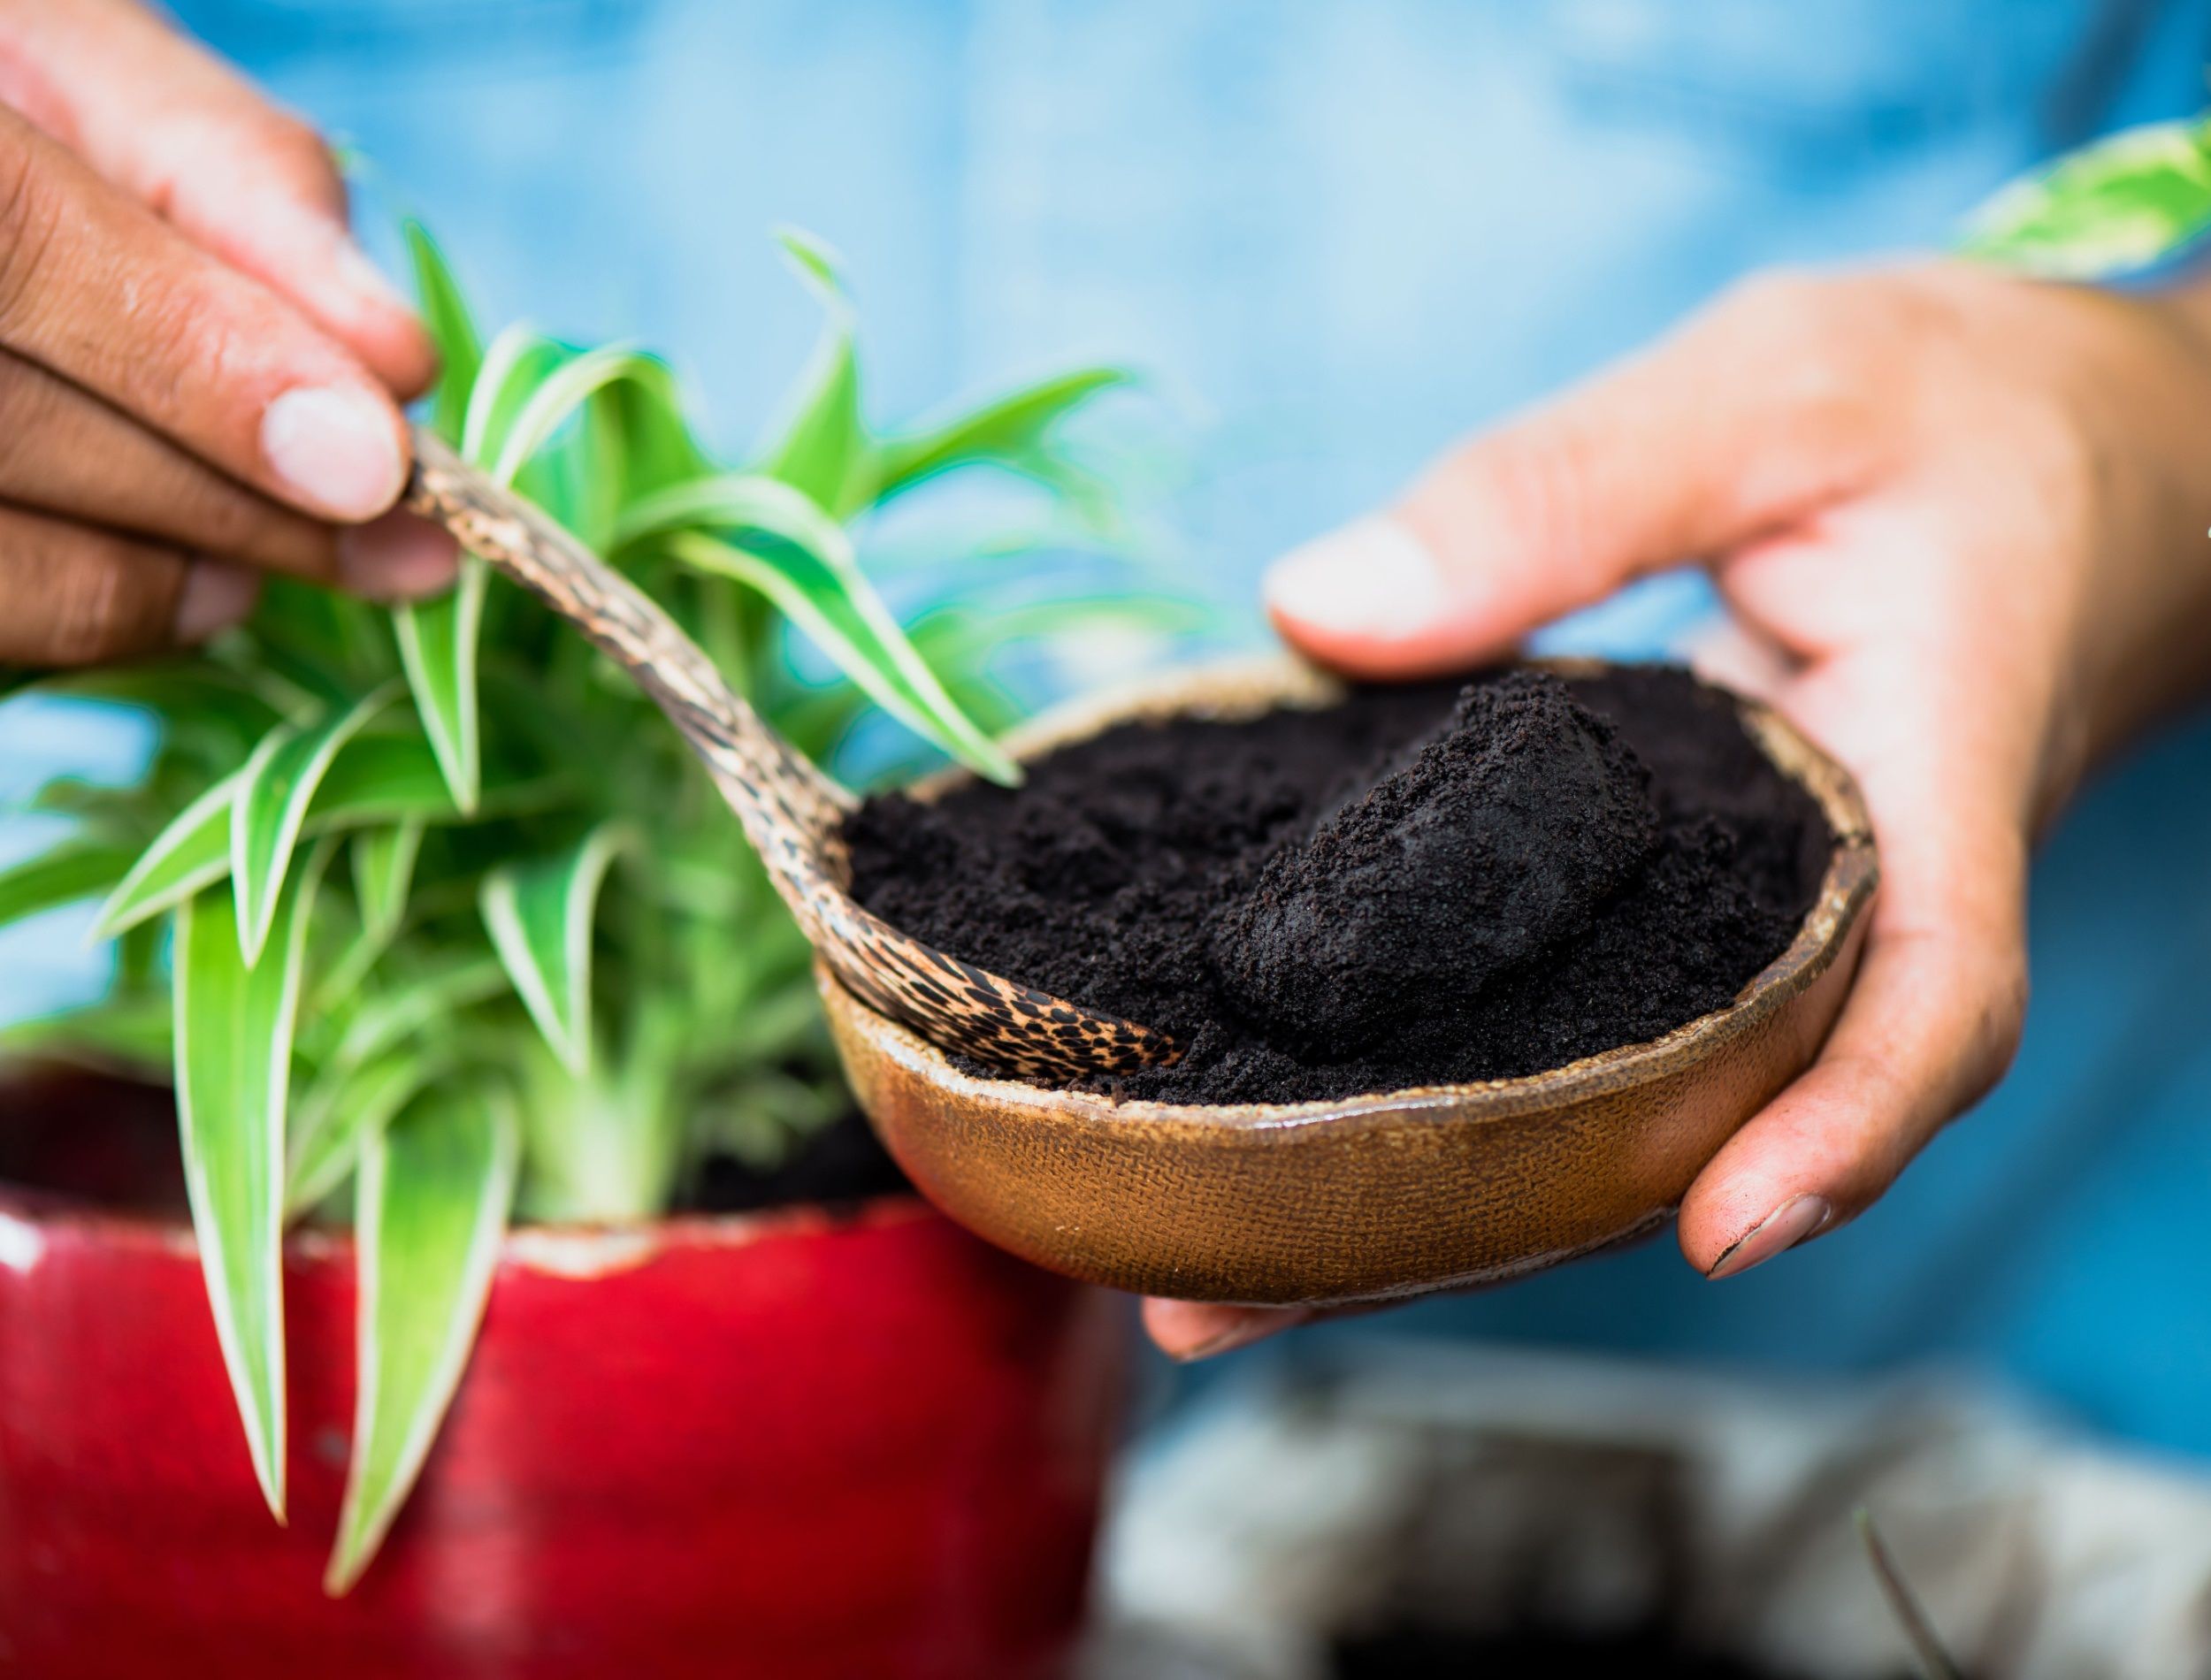 Recycle used coffee grounds, using used coffee grounds as fertilizer.